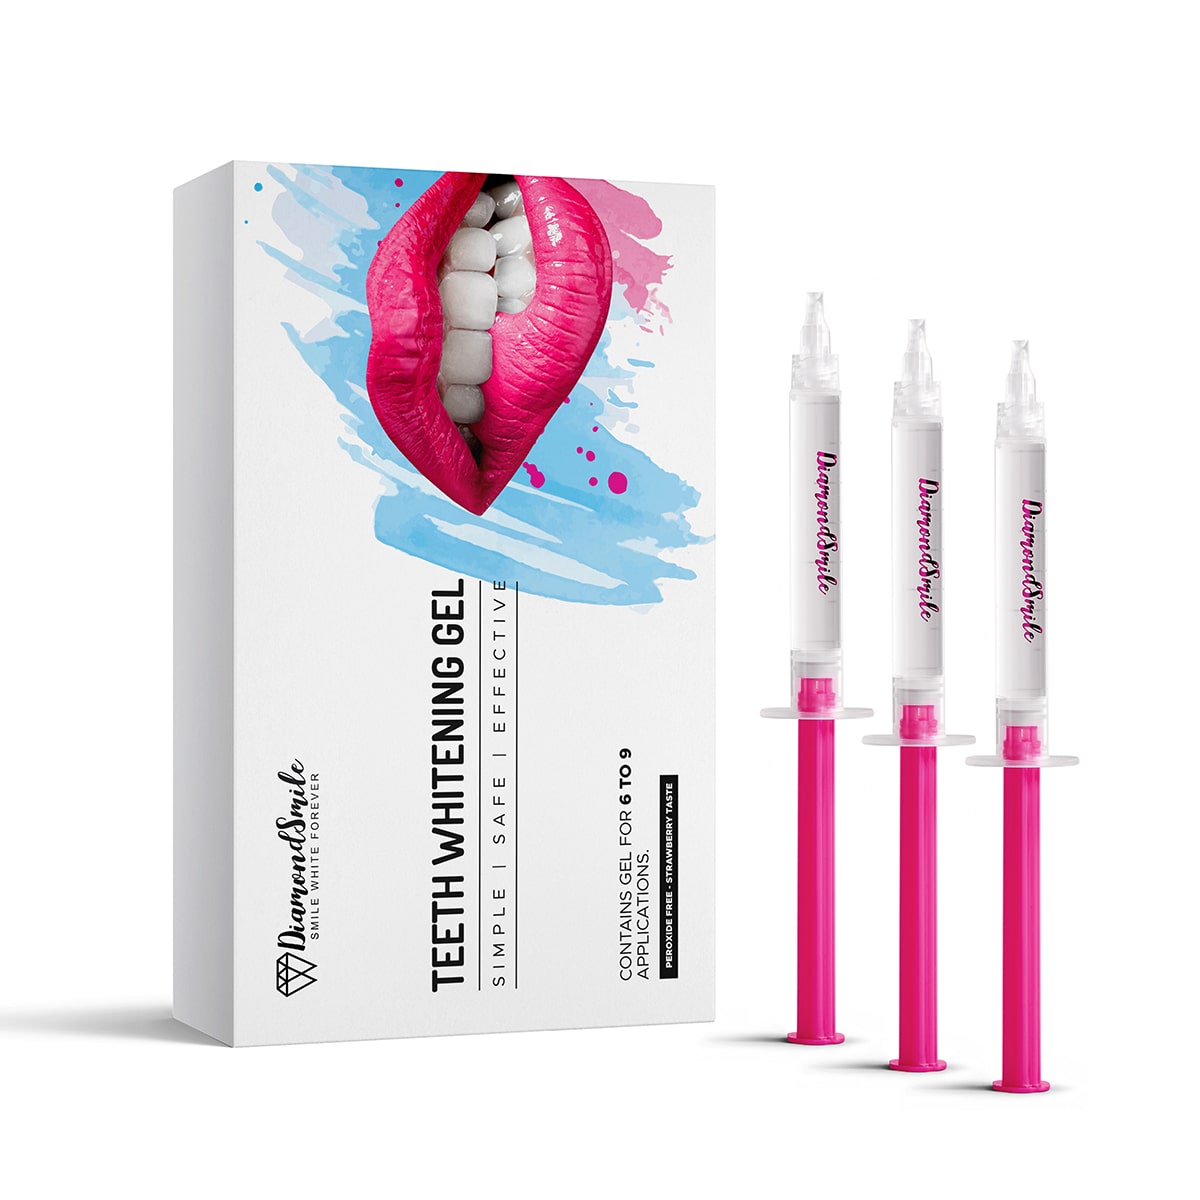 Tooth whitening gel for whitening the teeth